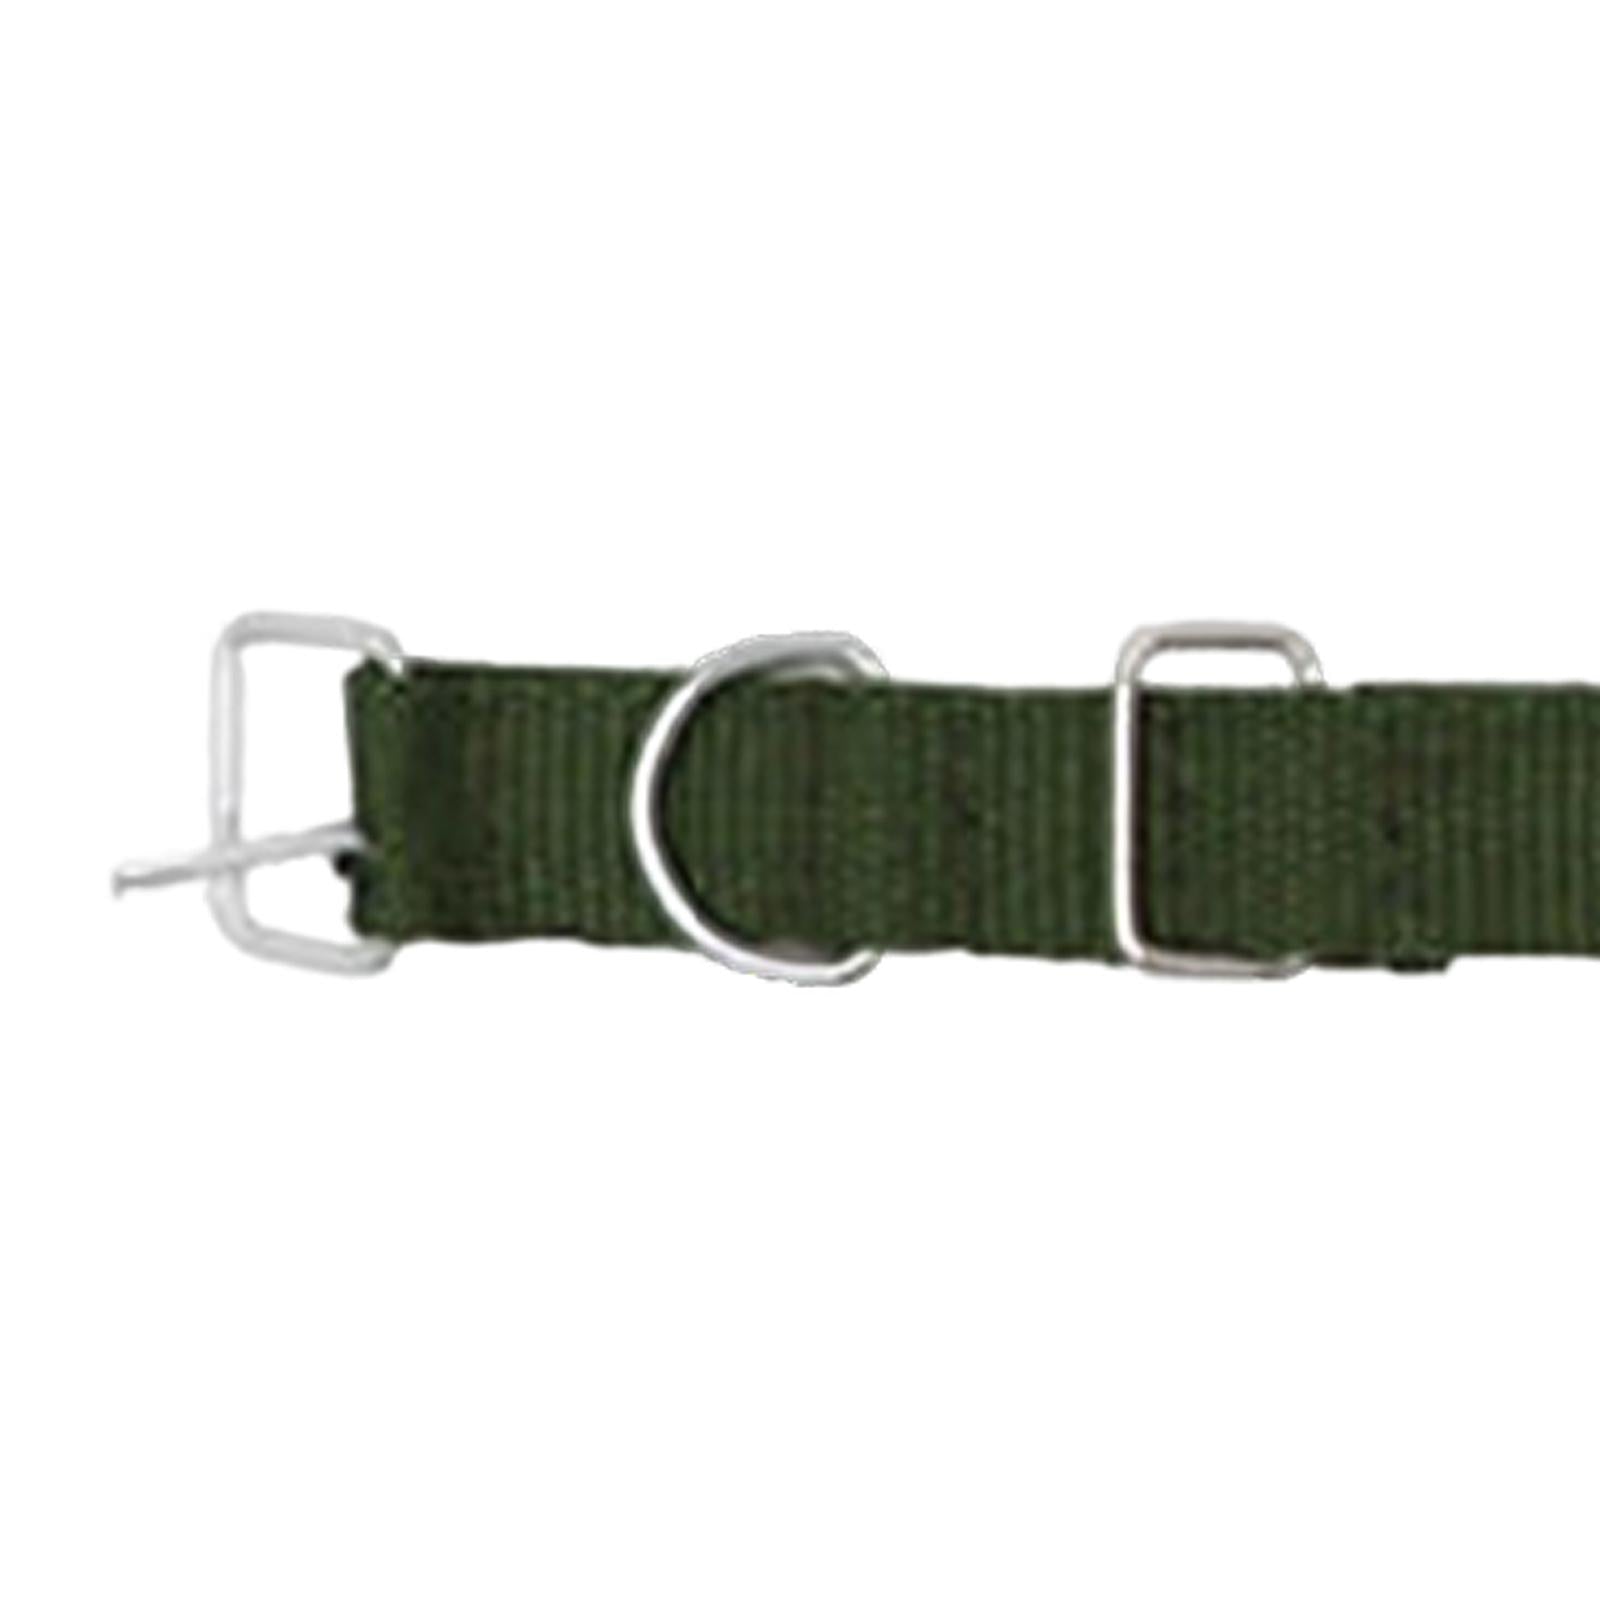 Portable Cow Neck Strap Thicken Sturdy Canvas for Farm Animal Sheep Horse 17.32in